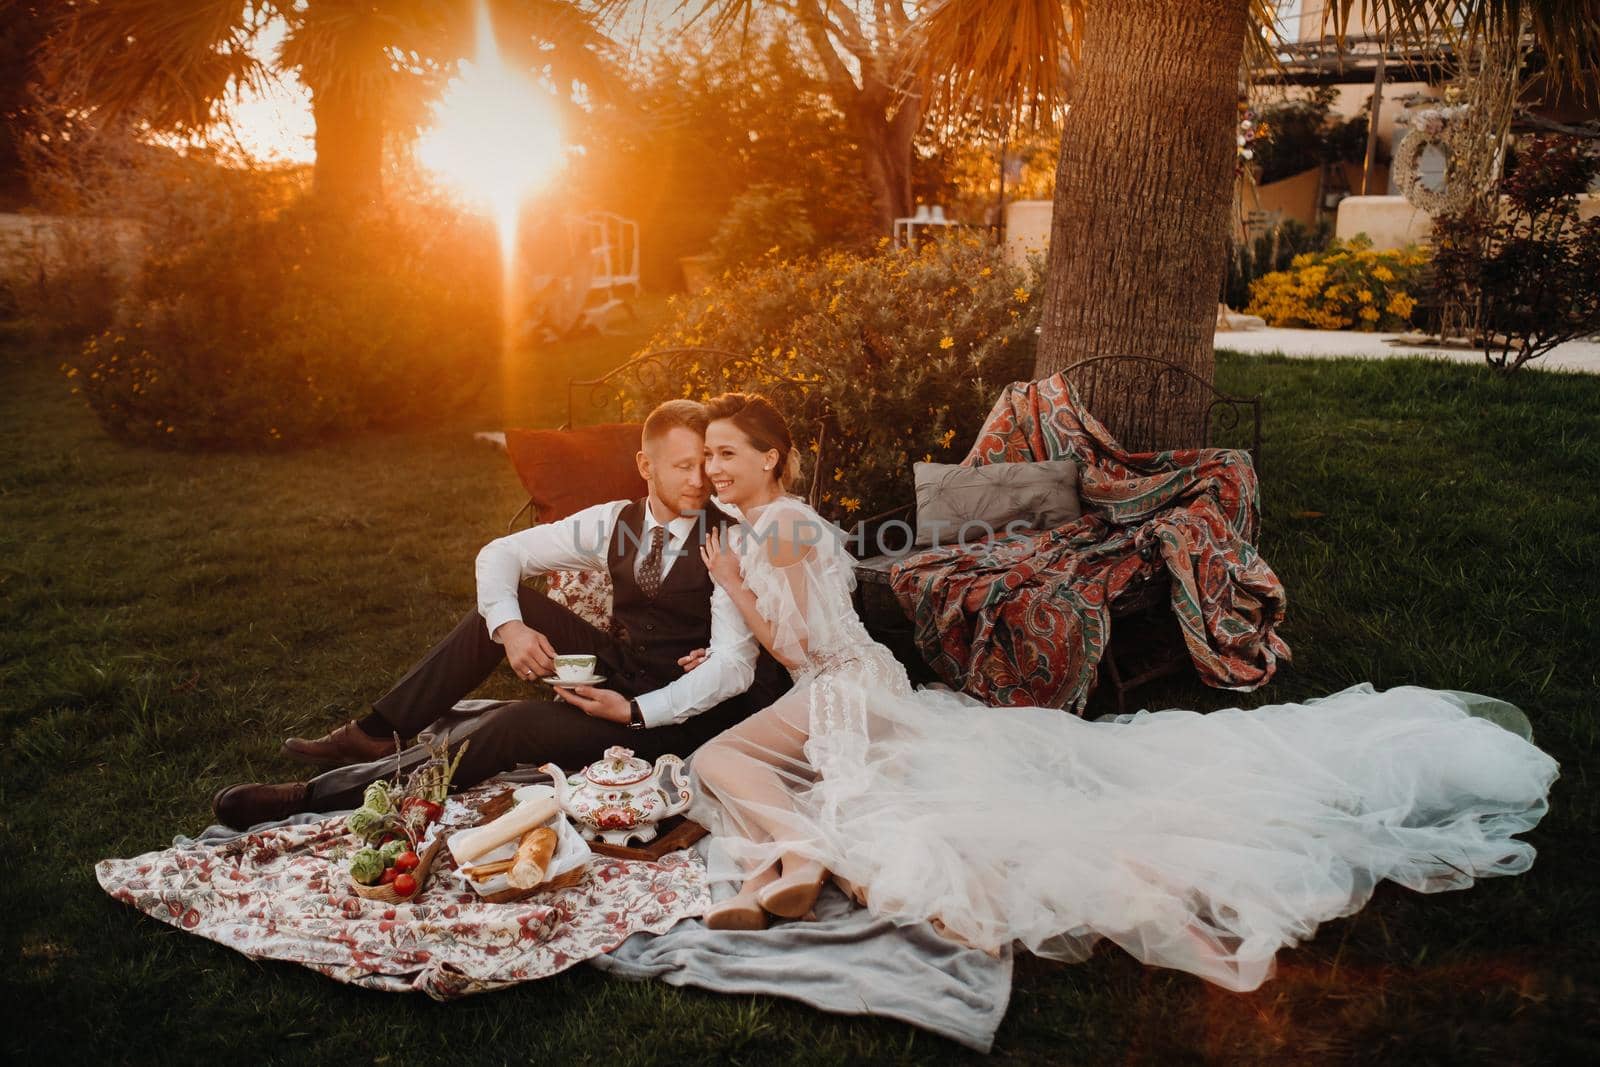 Dinner the Bridal couple at the picnic.A couple is relaxing at sunset in France.Bride and groom on a picnic in Provence. by Lobachad